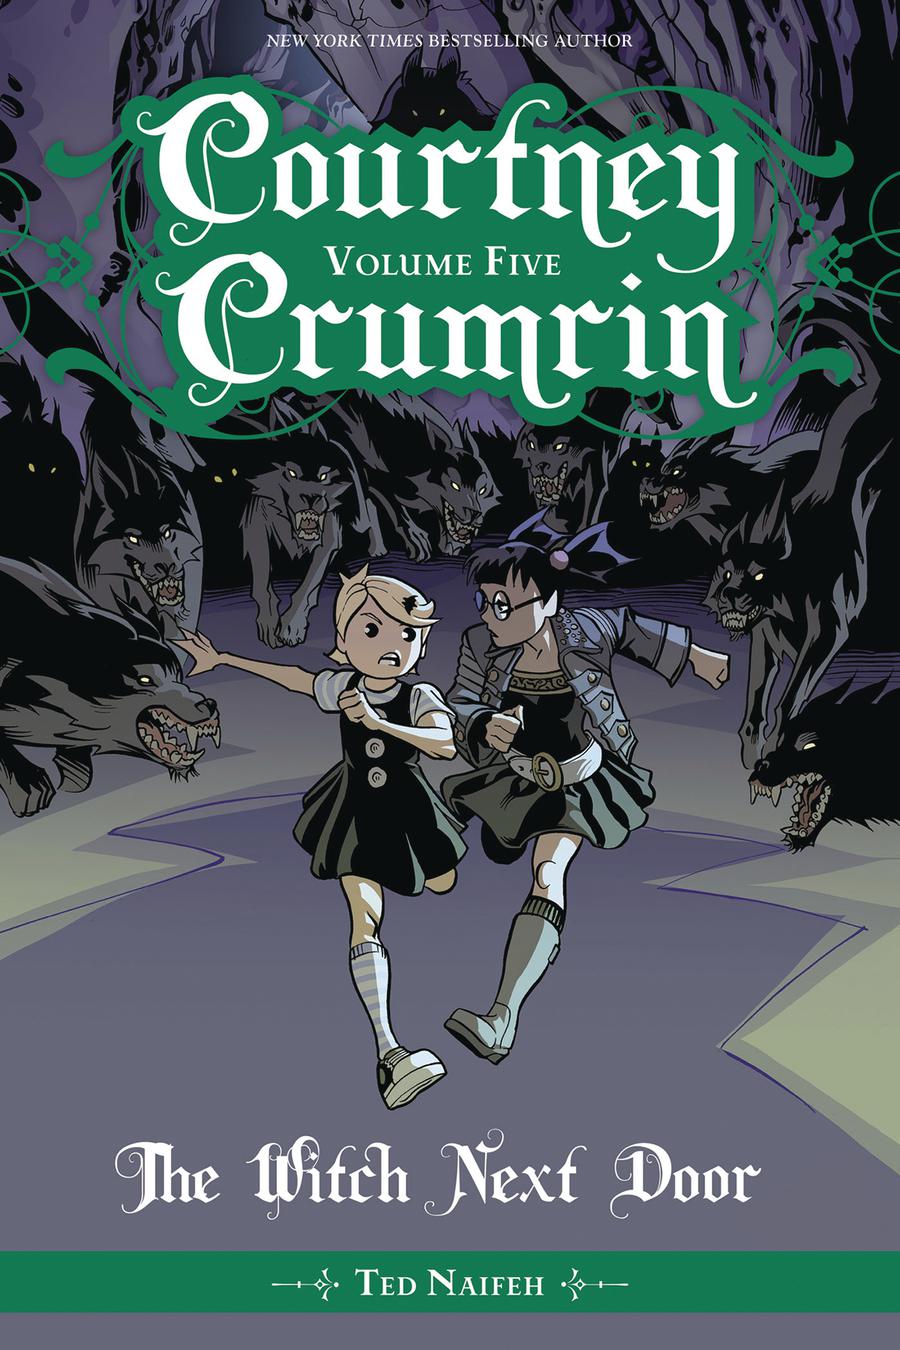 Courtney Crumrin Vol 5 The Witch Next Door TP Special Edition